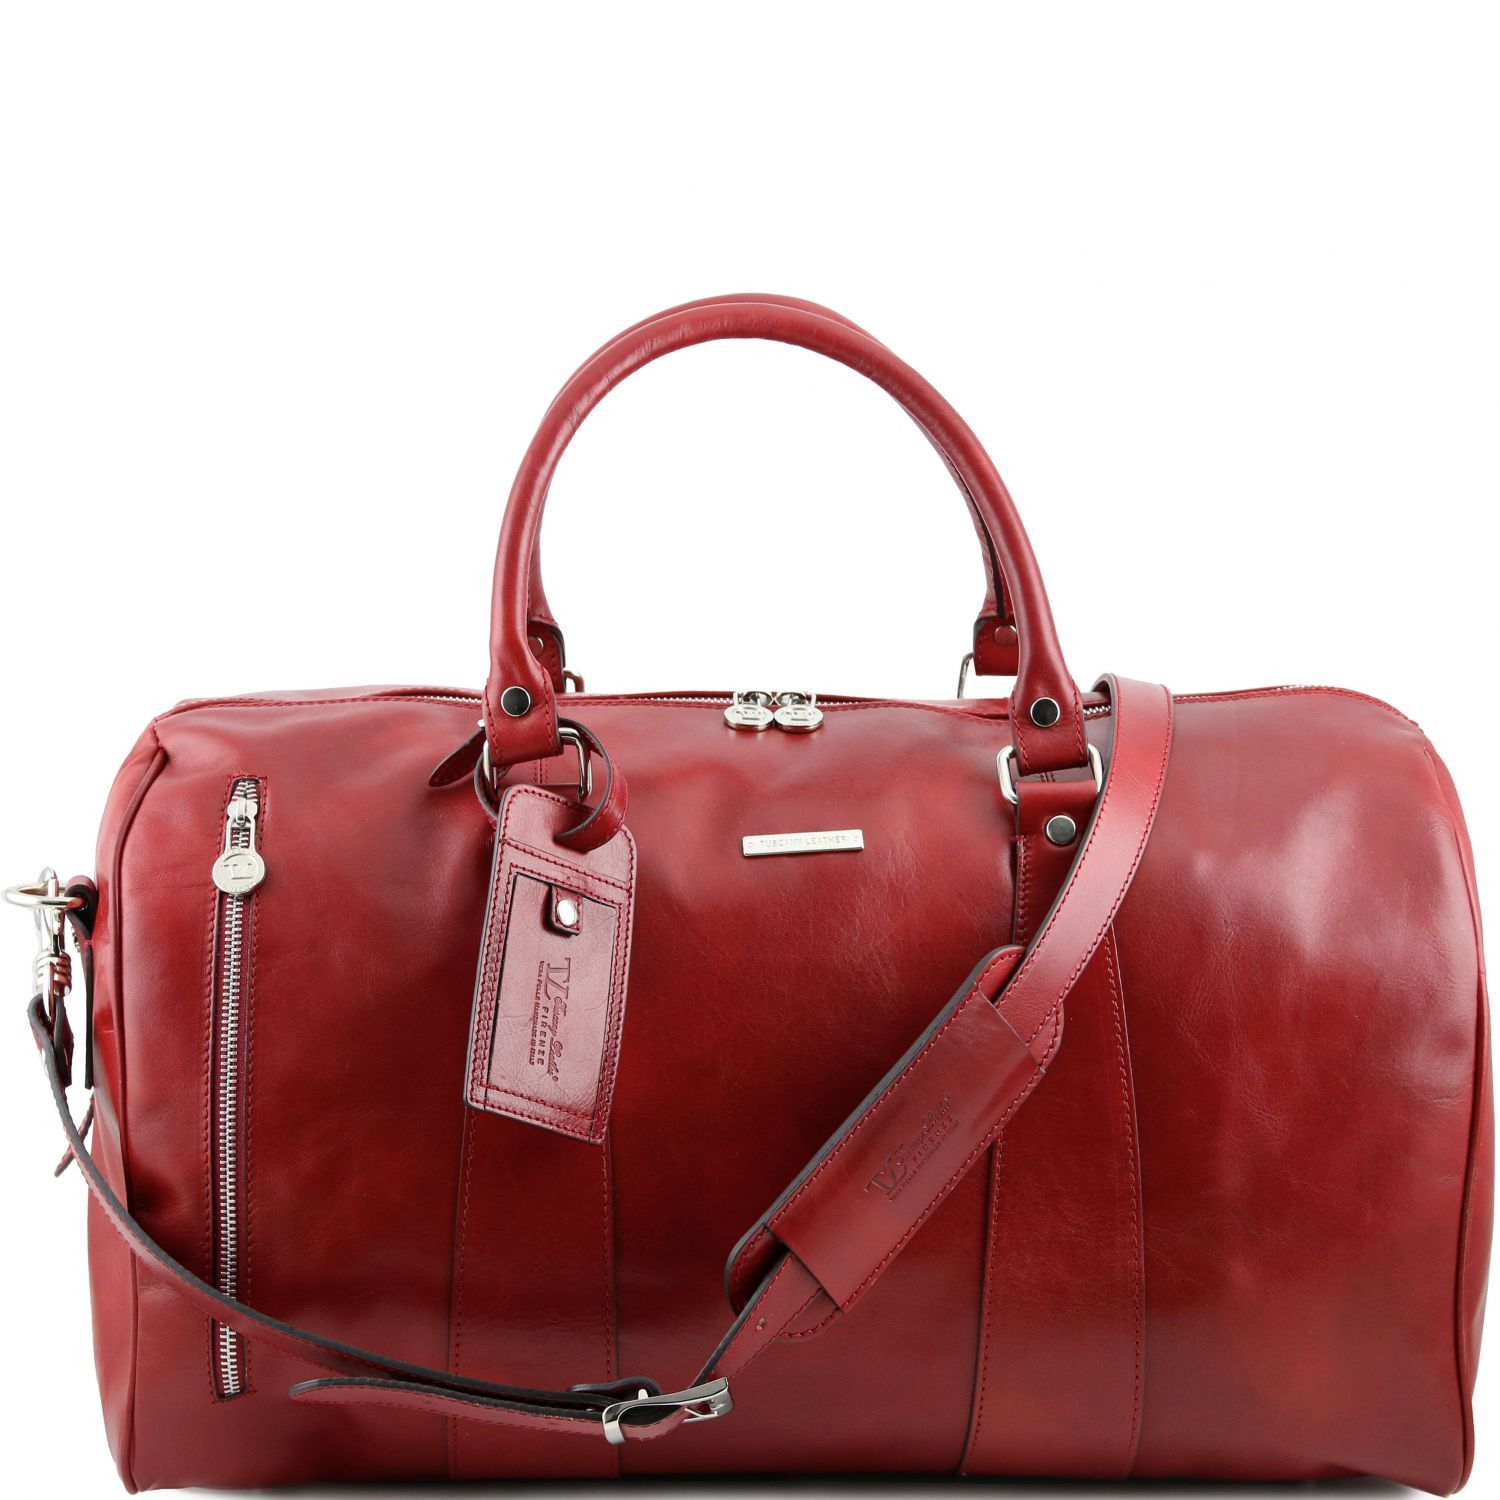 tl voyager travel leather duffle bag